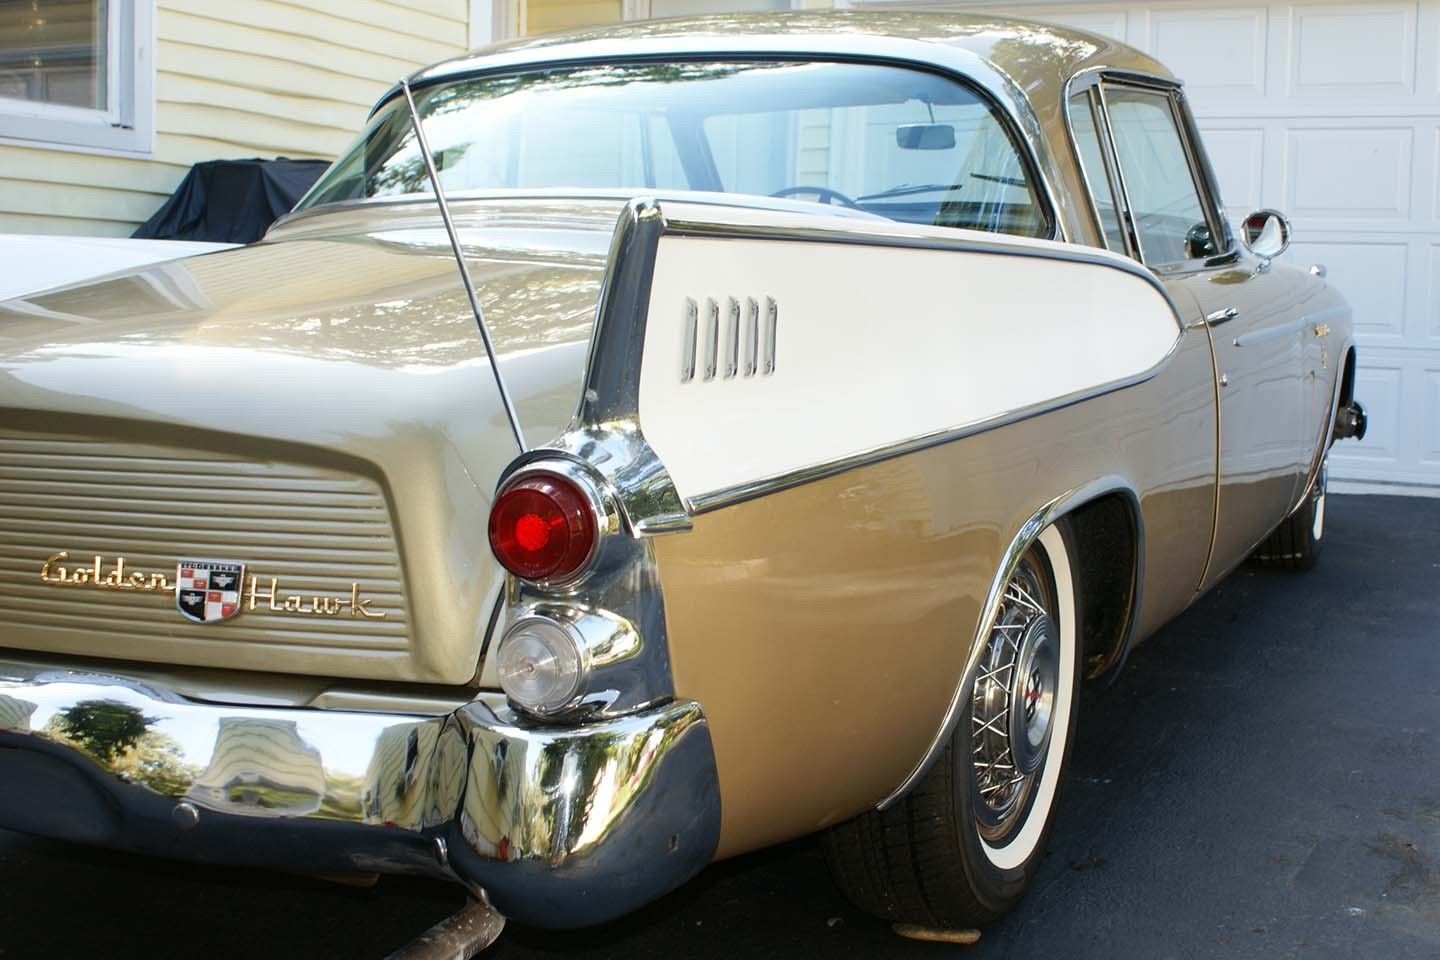 The rear fins are one of the defining features of this Raymond Loewy design. The wire wheel hubcaps were a desirable optional extra.